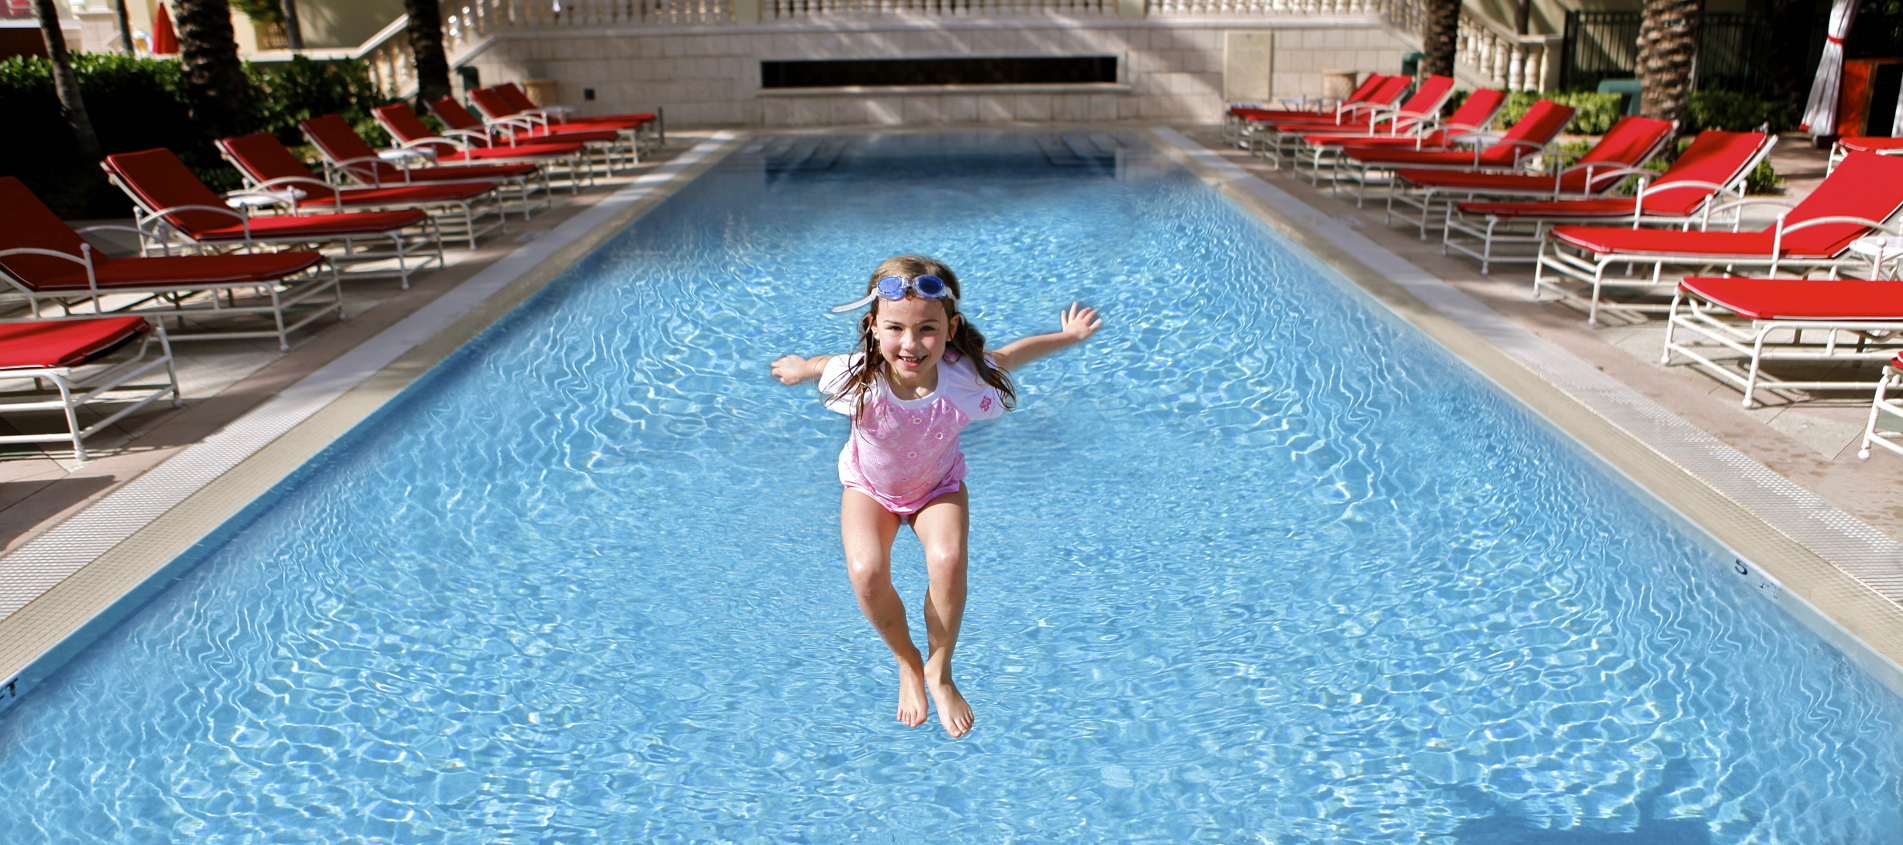 Girl Jumping Into Pool